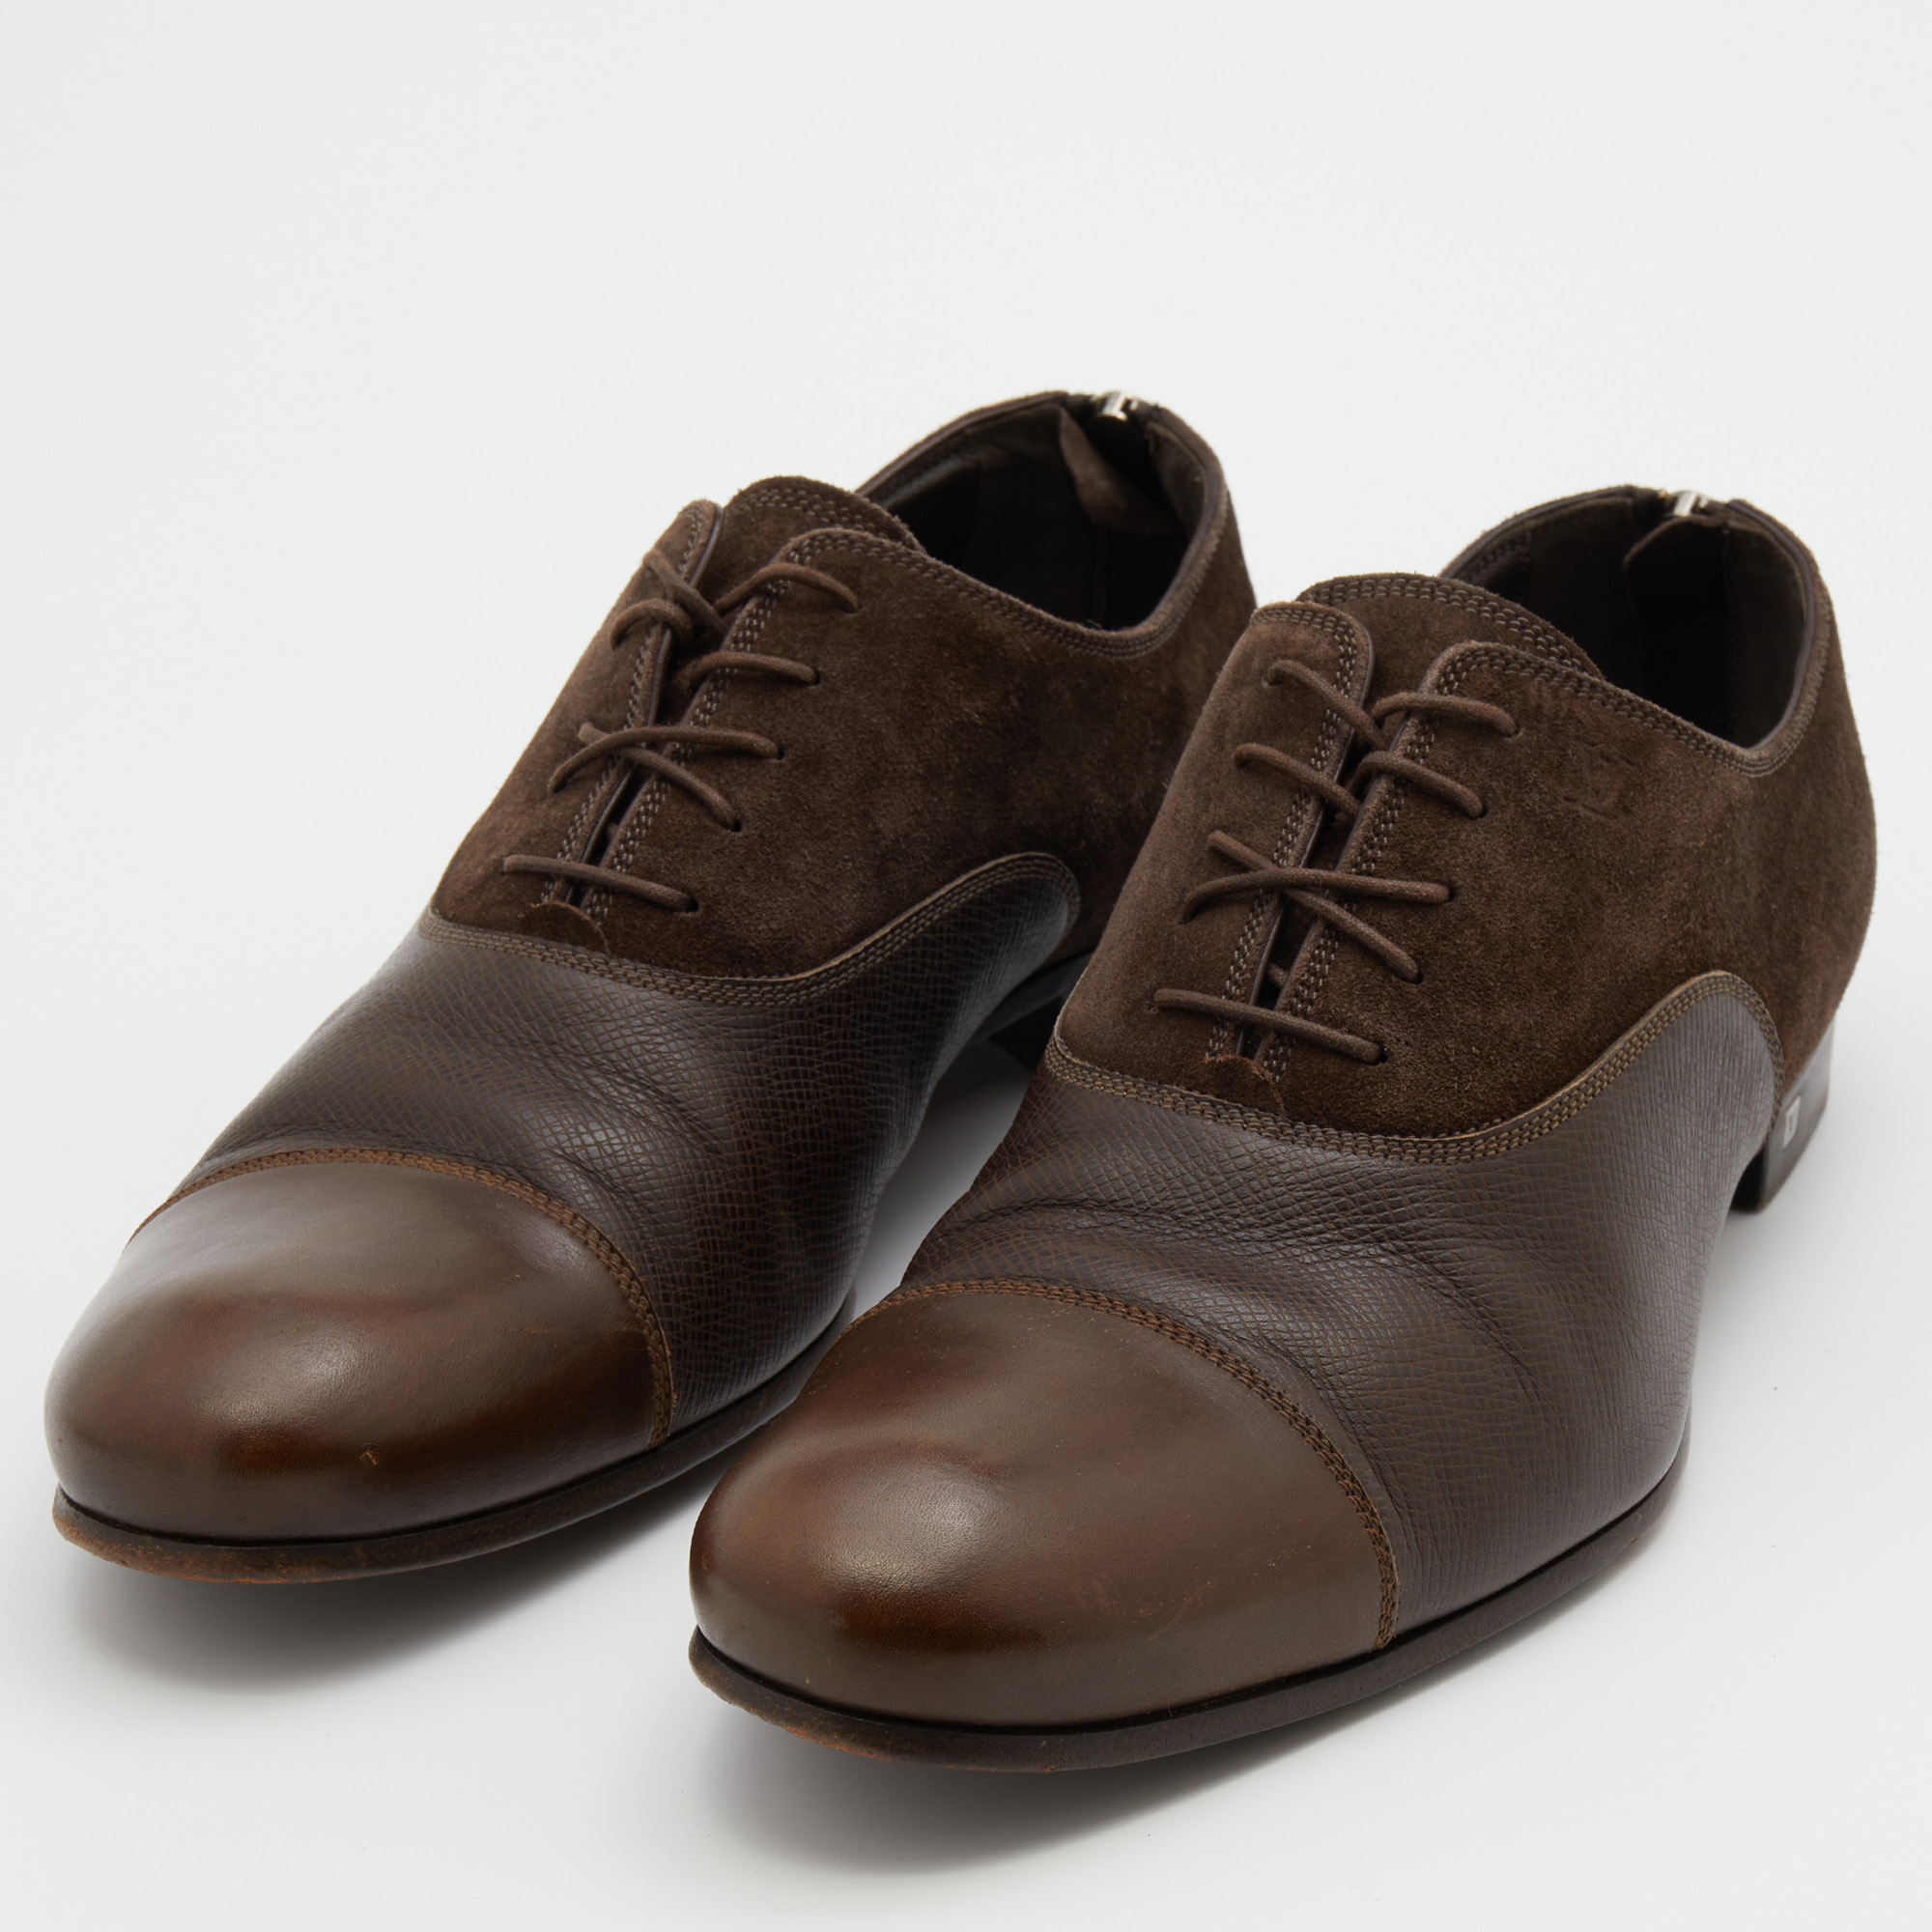 

Louis Vuitton Dark Brown Leather and Suede Lace Up Oxfords Size